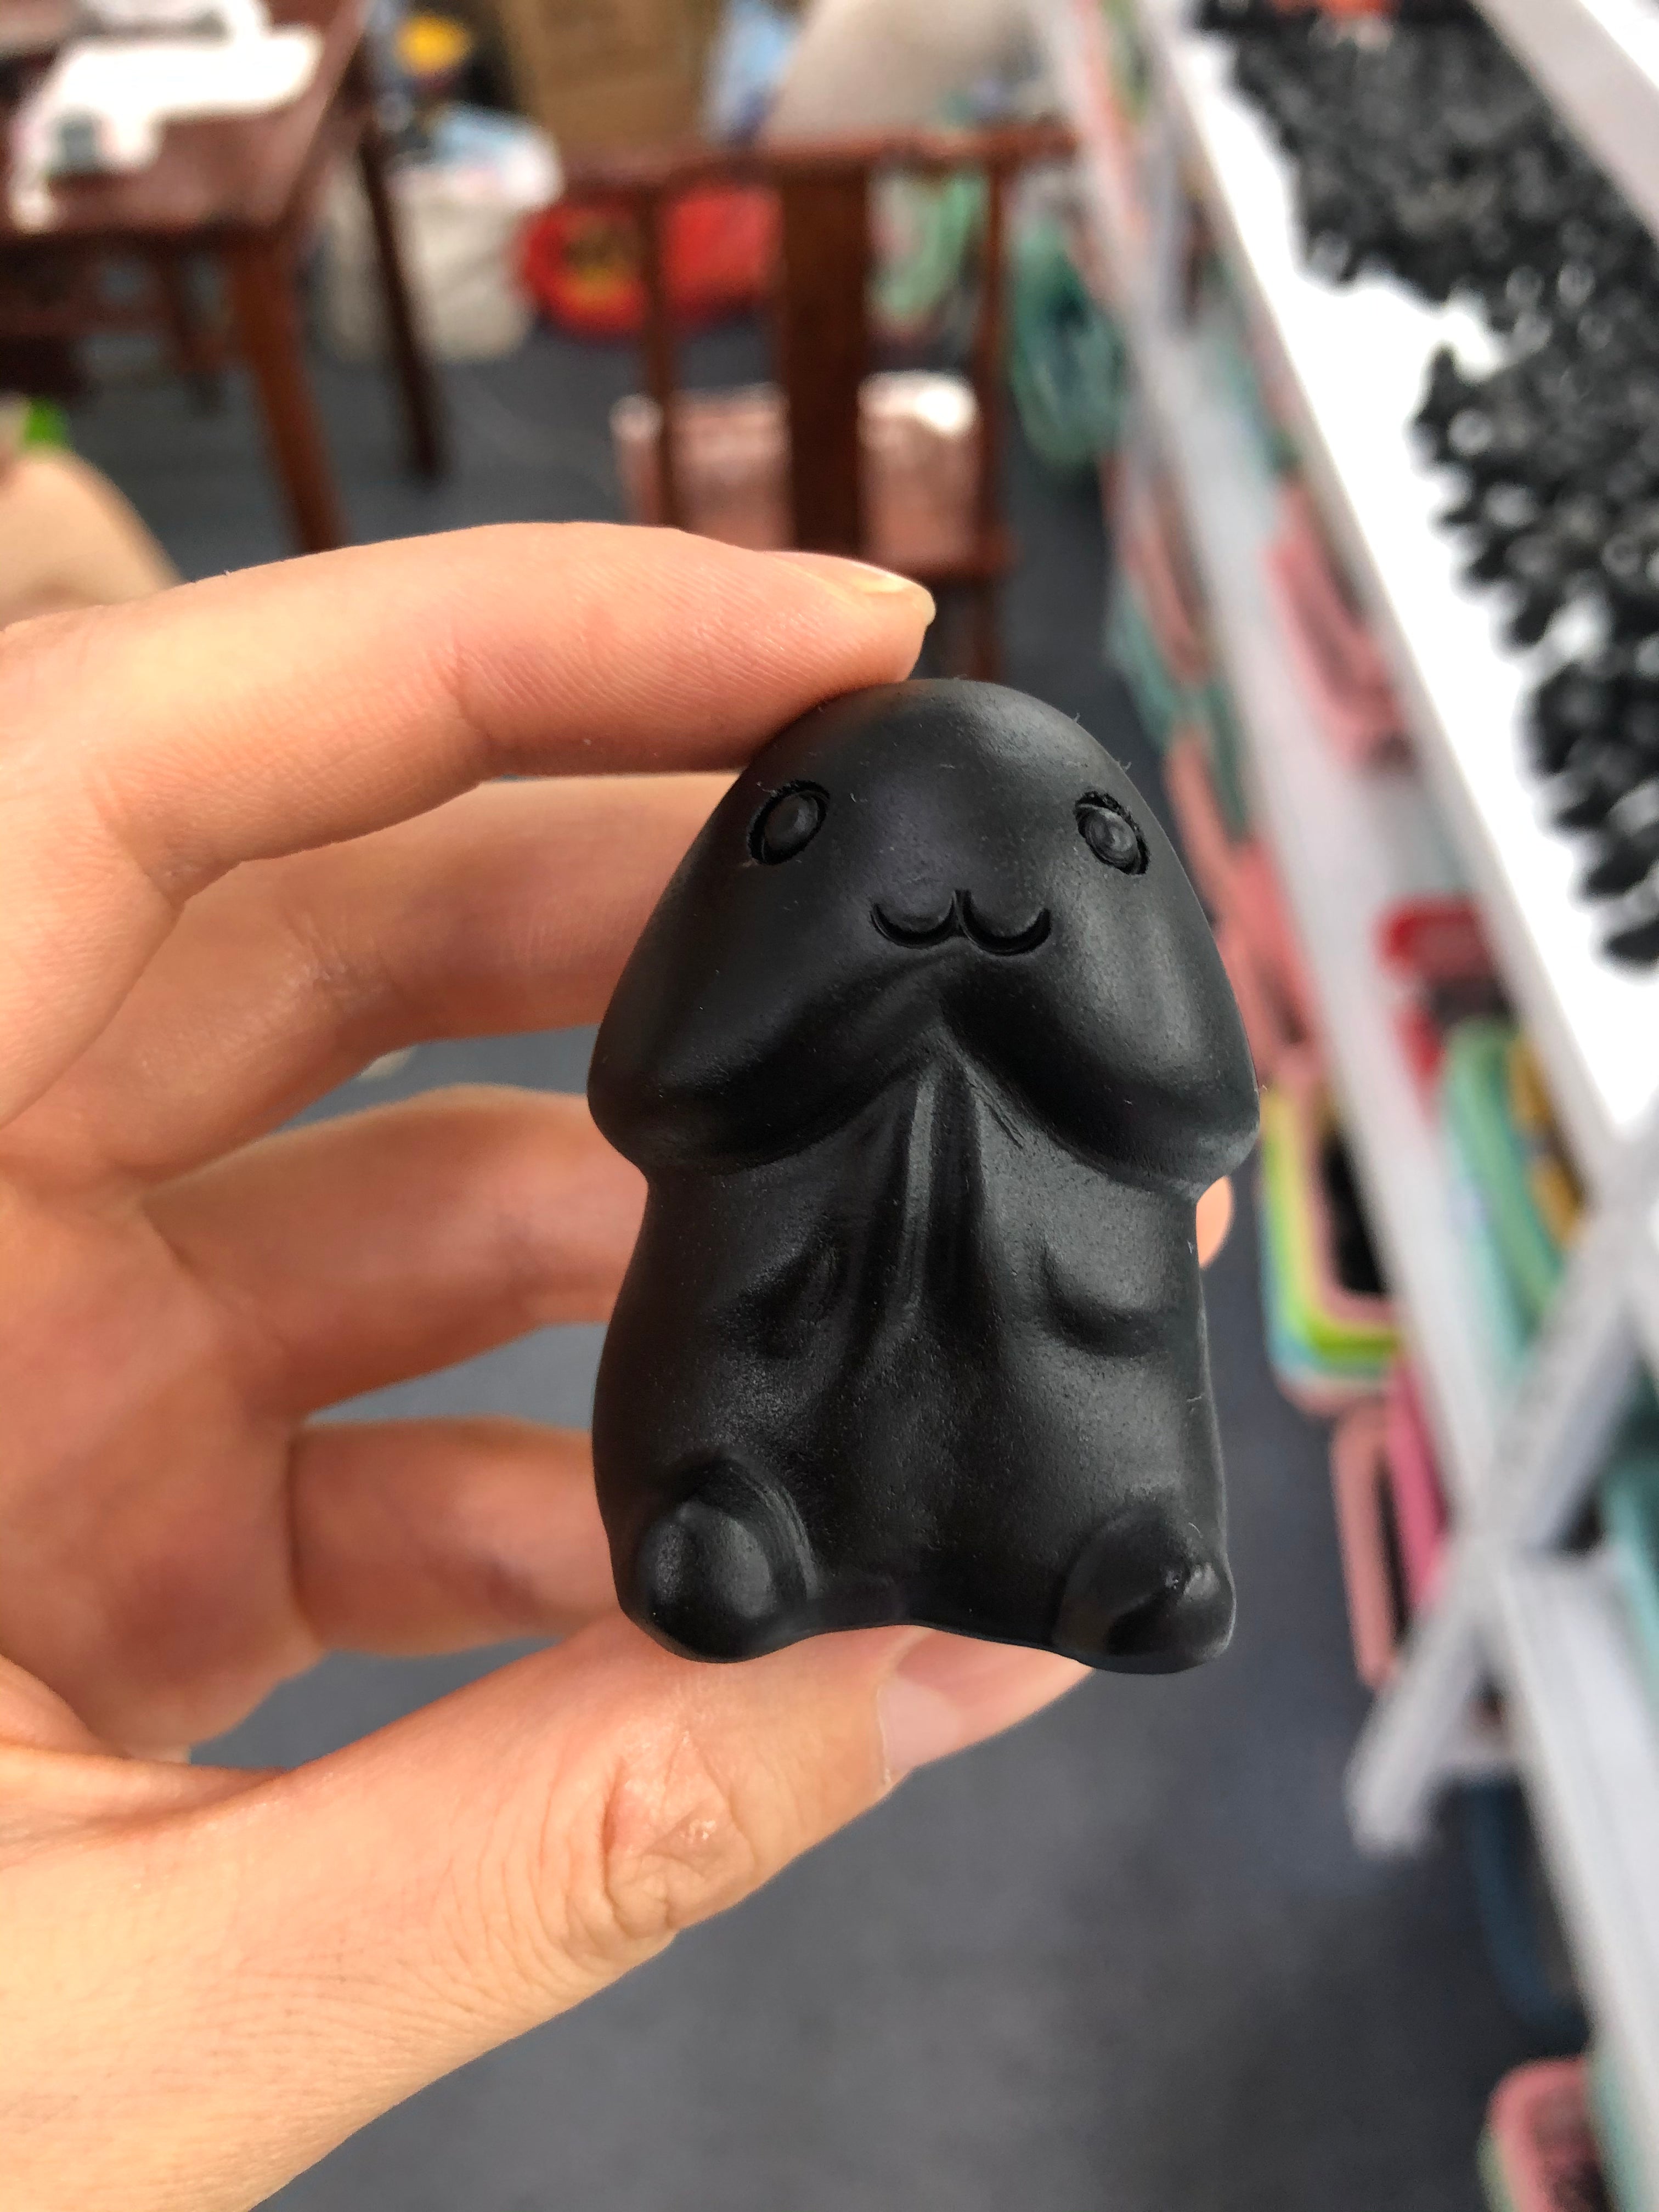 Obsidian animals/ghost/penis/